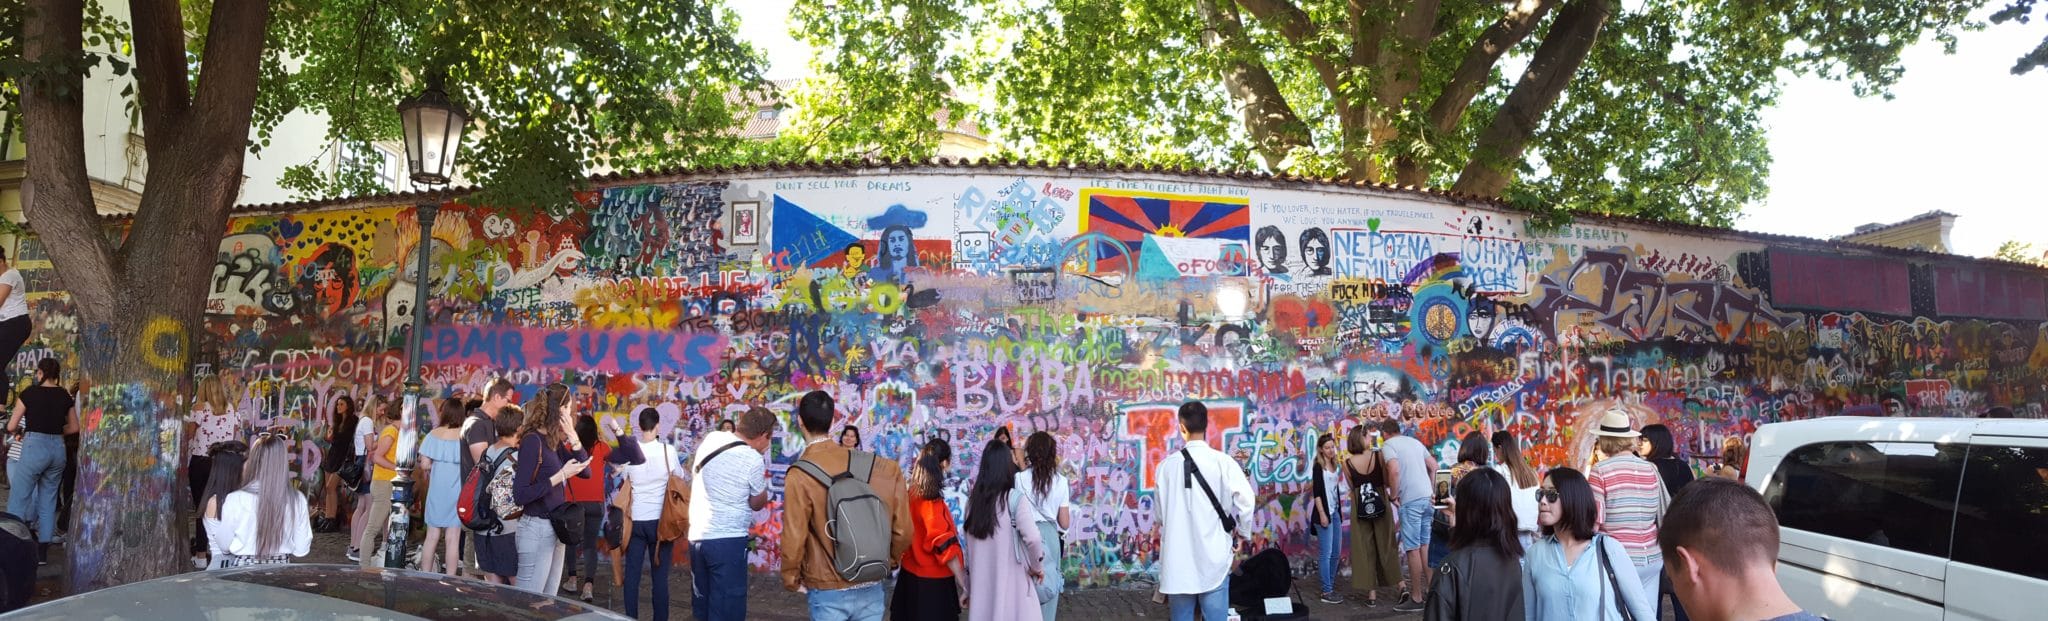 Lennon Wall - Top 10 Things to See and Do in Prague